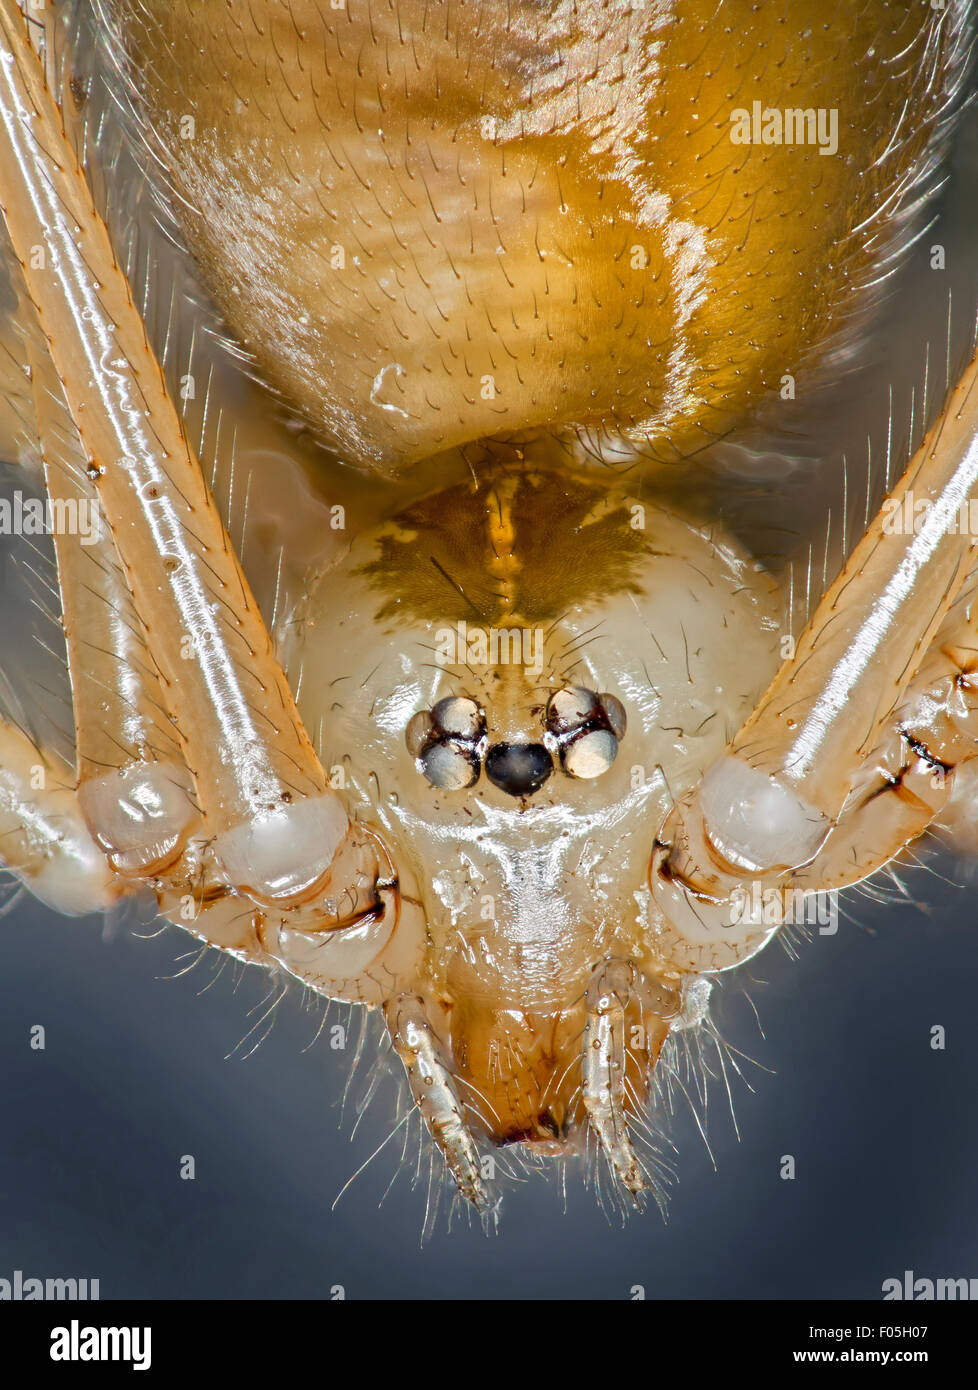 Pholcus phalangioides,daddy long-gambe spider, capostipite di lungo le gambe spider, falegname spider, daddy long-gambe, dettaglio della testa Foto Stock